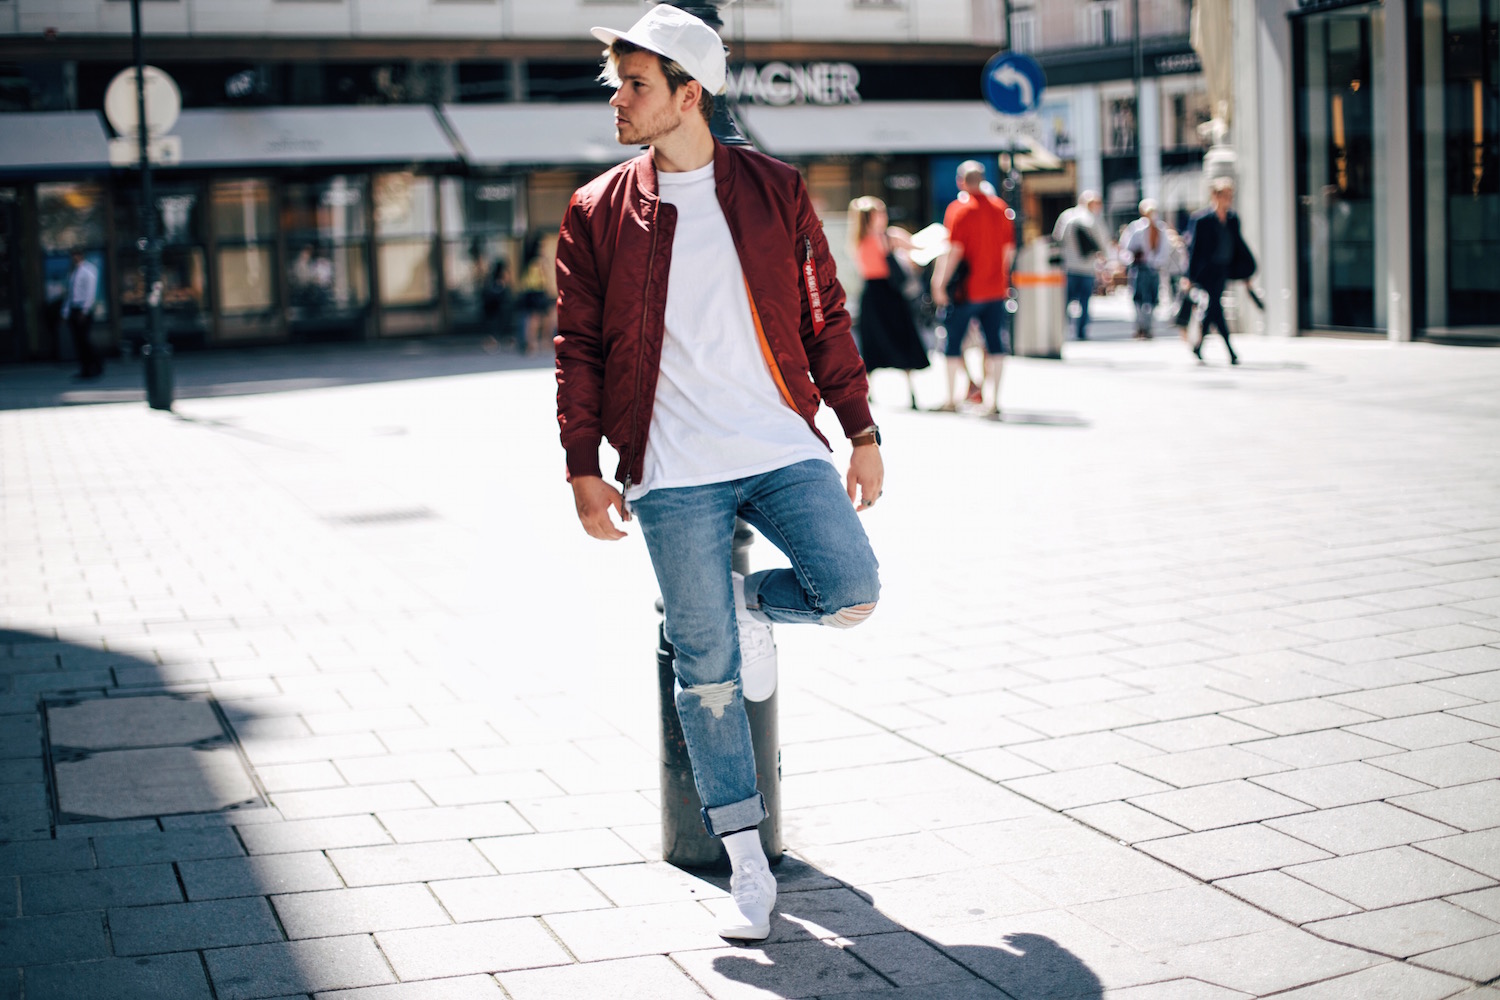 Old School Streetstyle Alpha Industries Bomber Jacket Levis Jeans Austrian Mens Fashion and Lifestyle Blogger Meanwhile in Awesometown